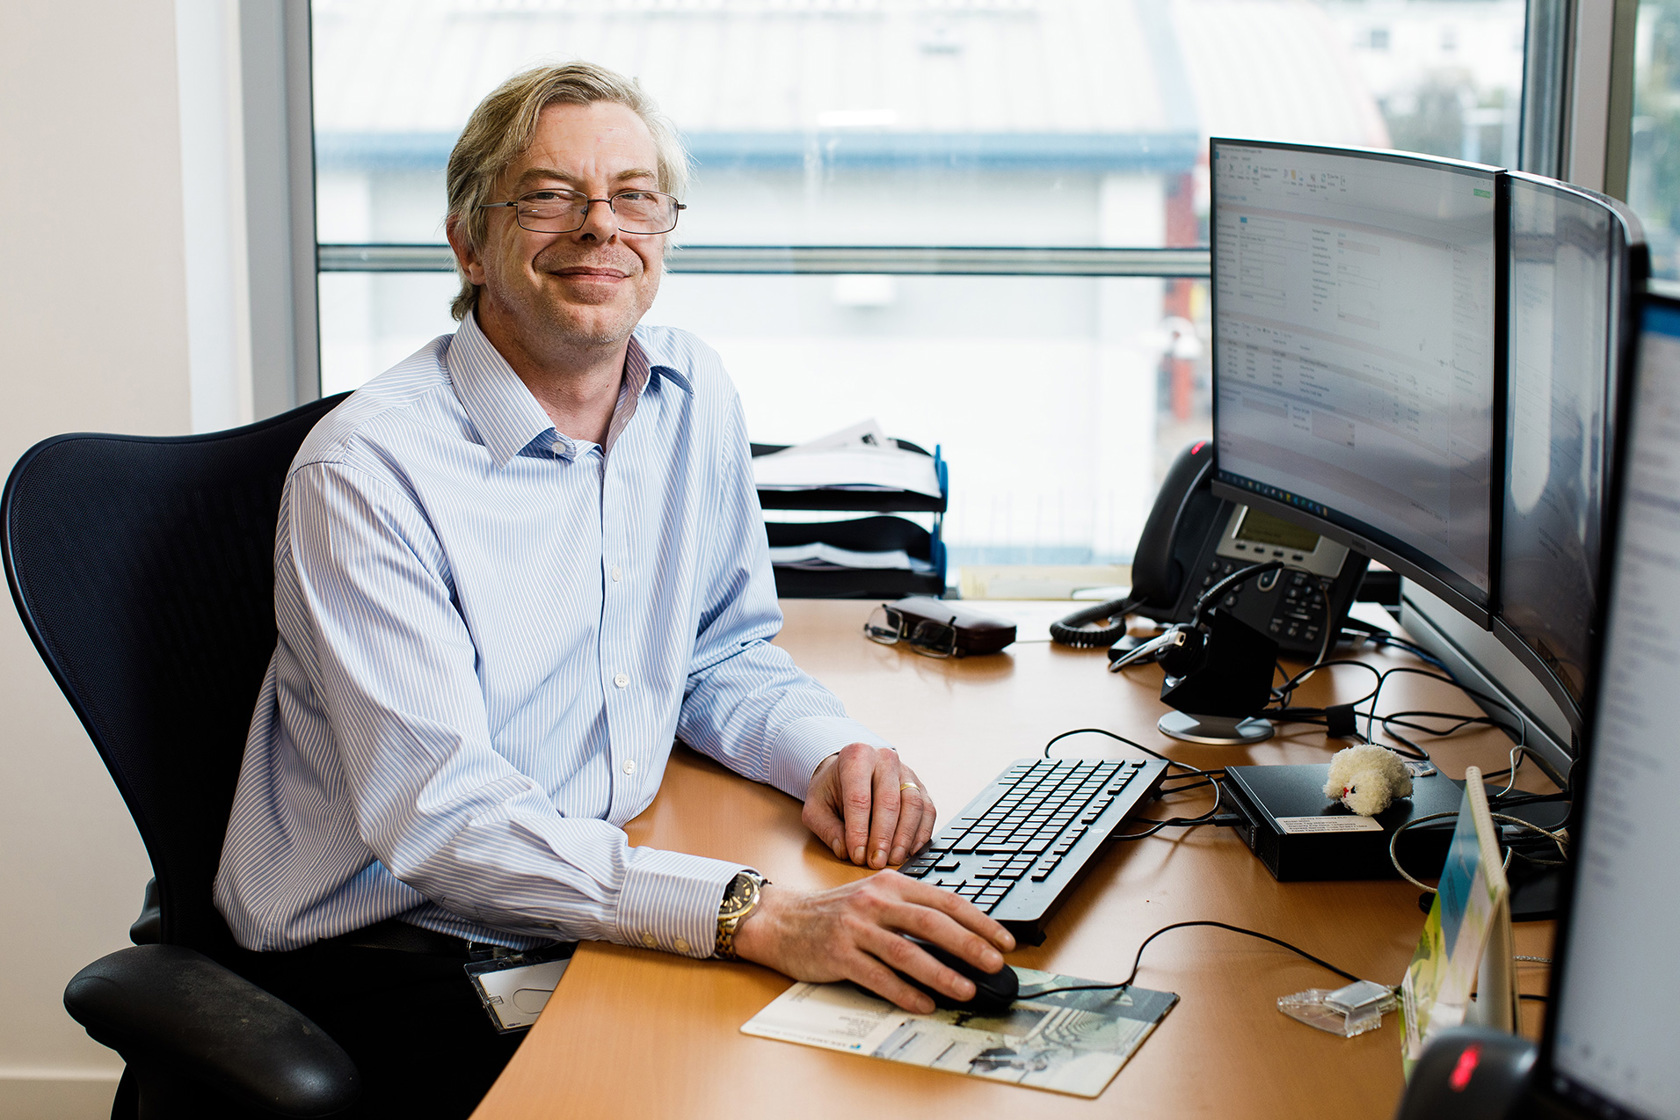 Scott Aldridge is photographed at his desk in the Jersey Electricity Powerhouse offices.